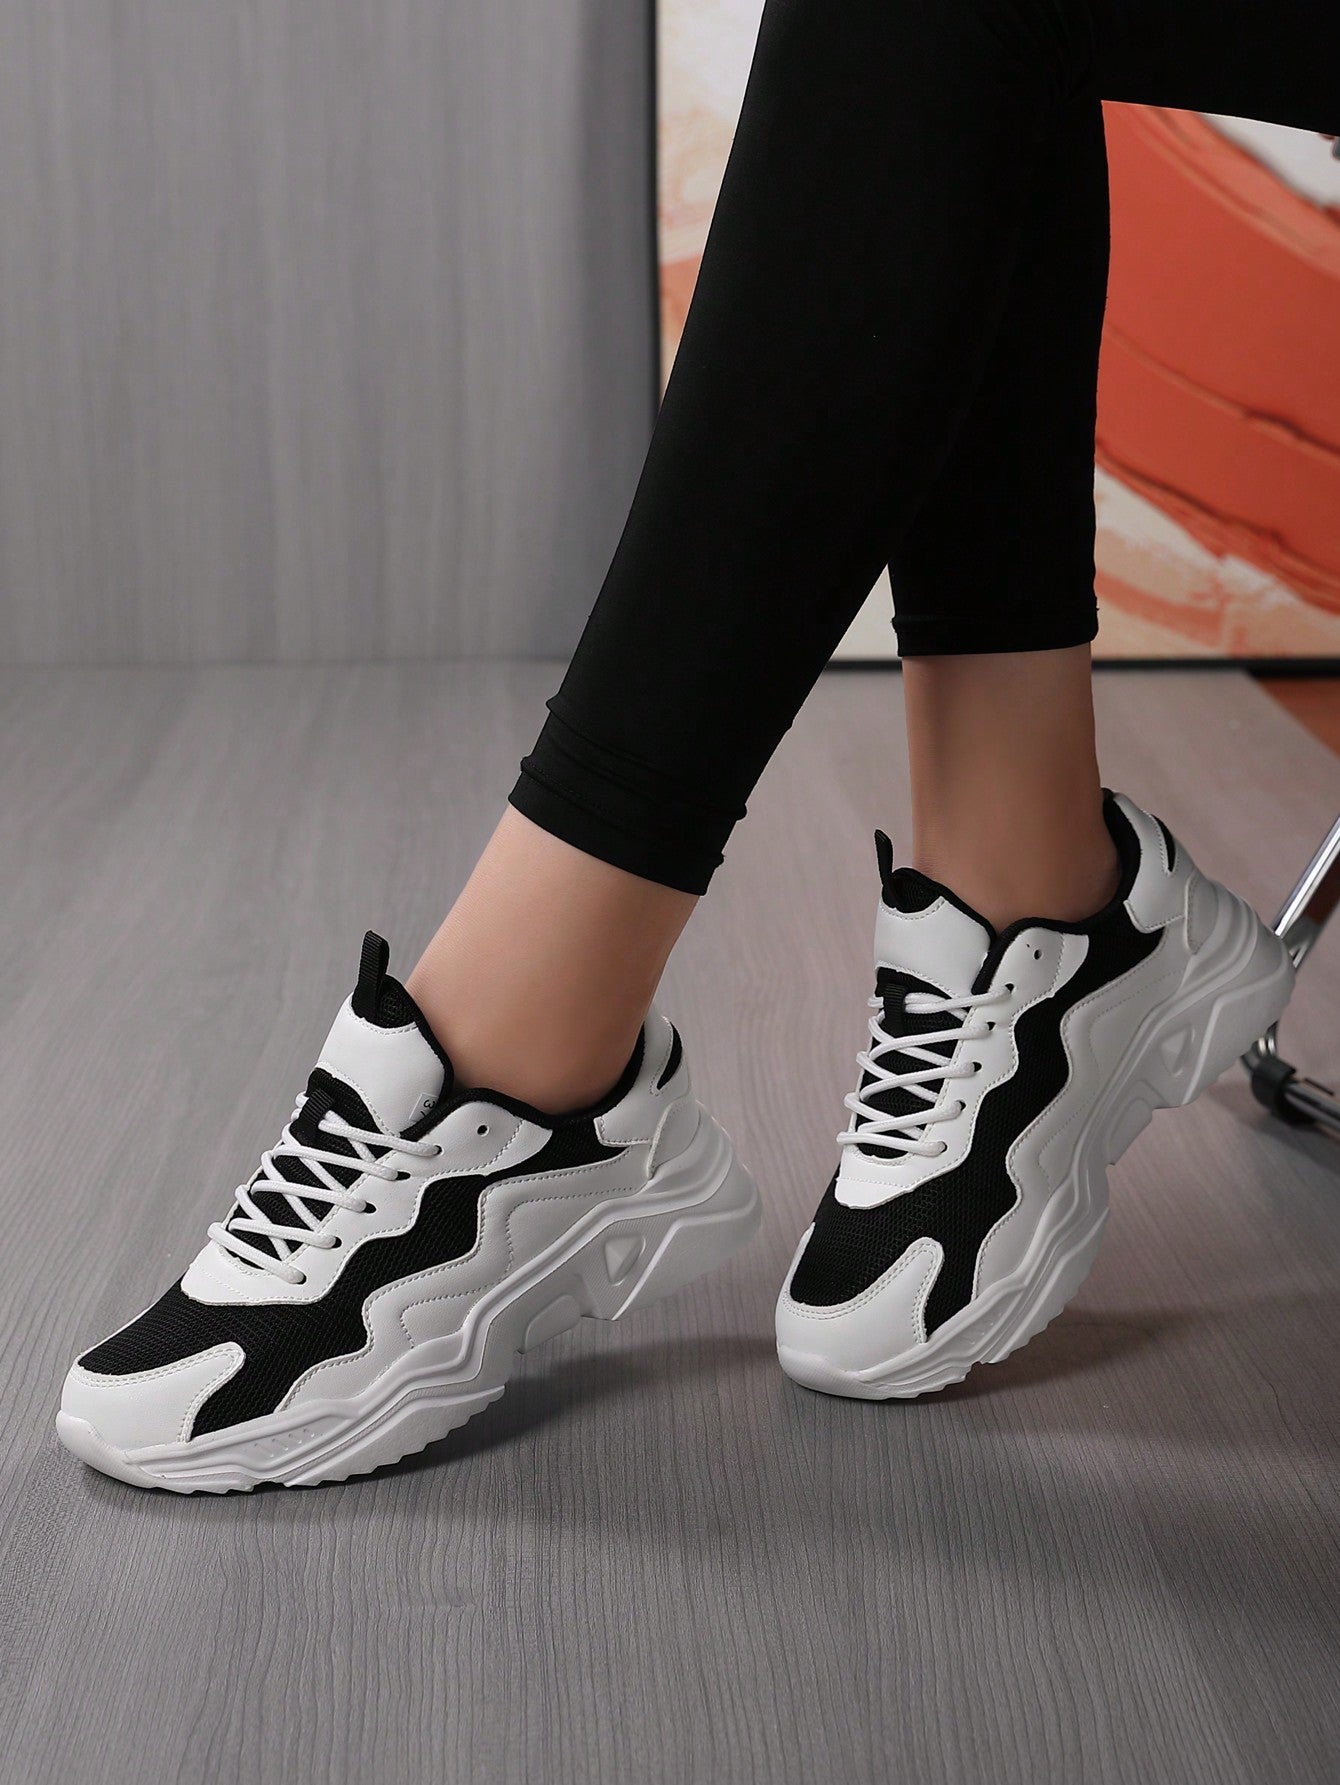 Women'S White Breathable Mesh Sneakers, Comfortable Low Top Lace Up Shoes, Women'S Casual Walking Shoes